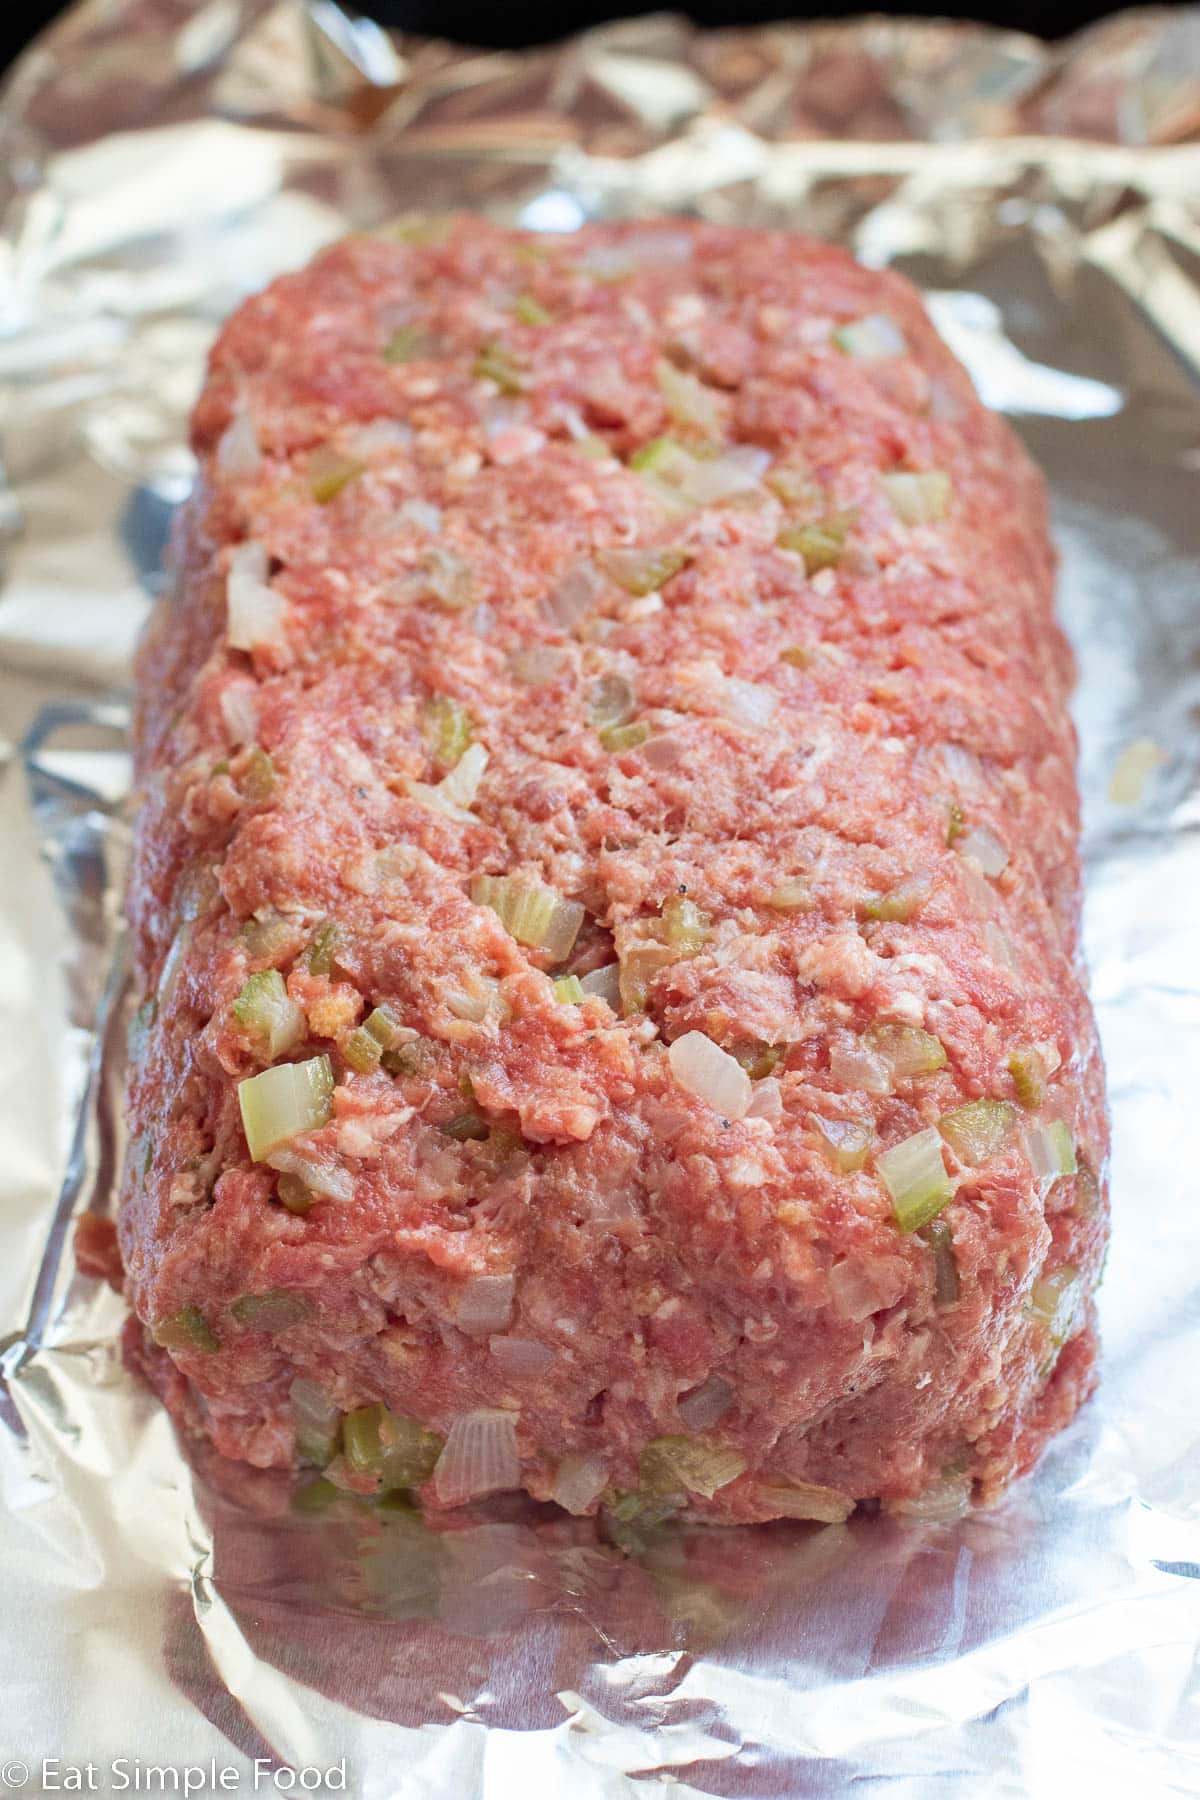 Raw meatloaf with diced celery and onions on an aluminum lined baking sheet.